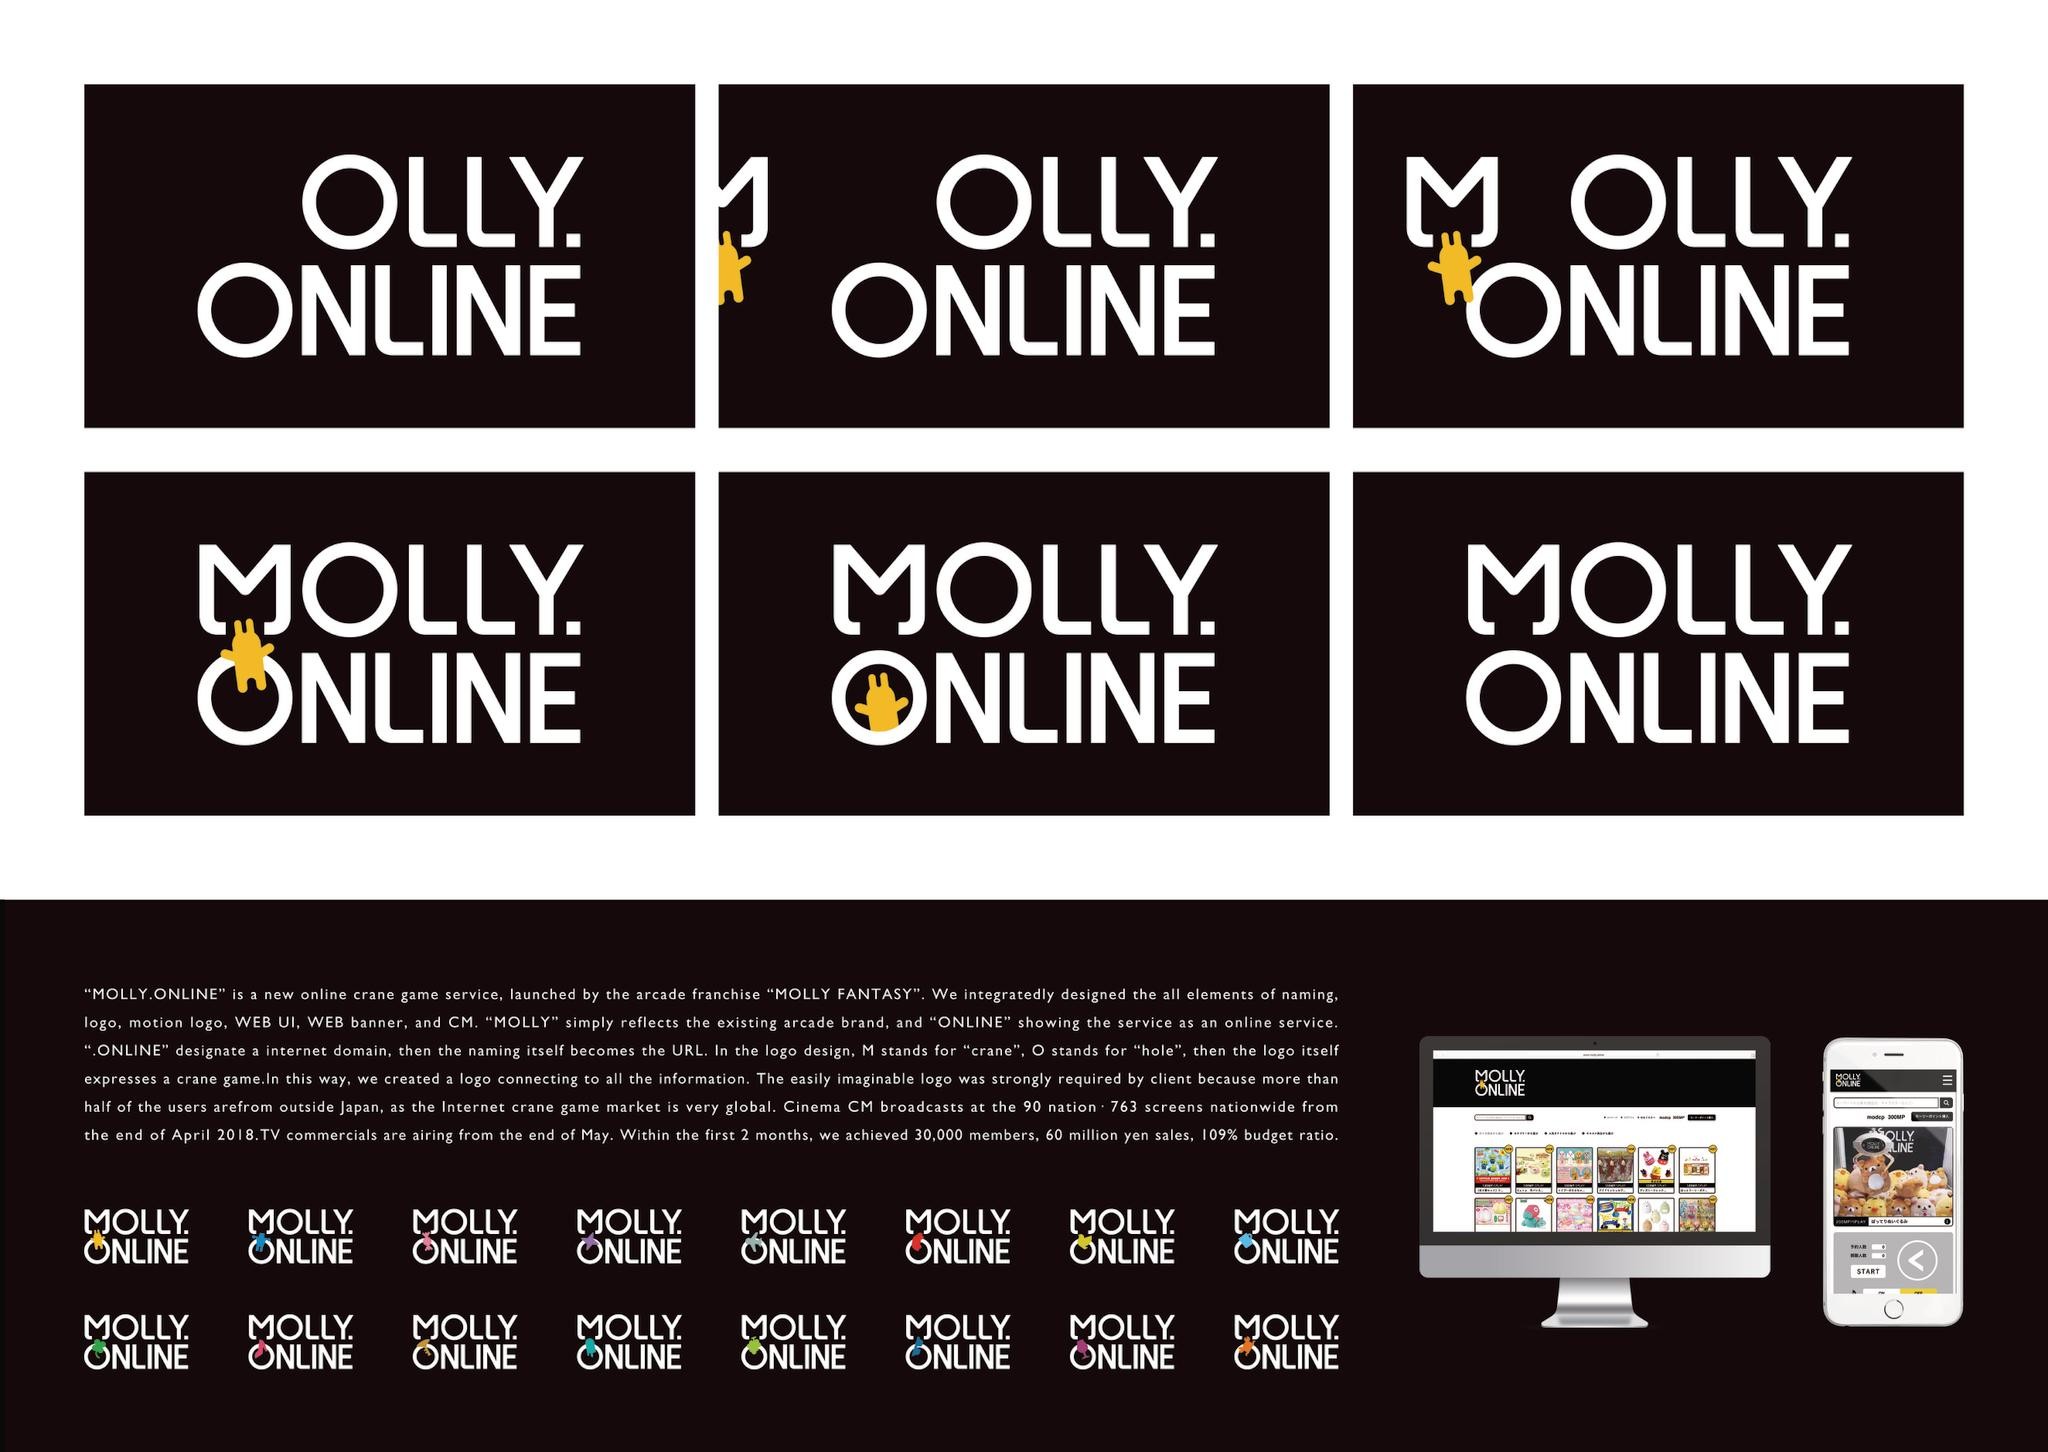 MOLLY.ONLINE